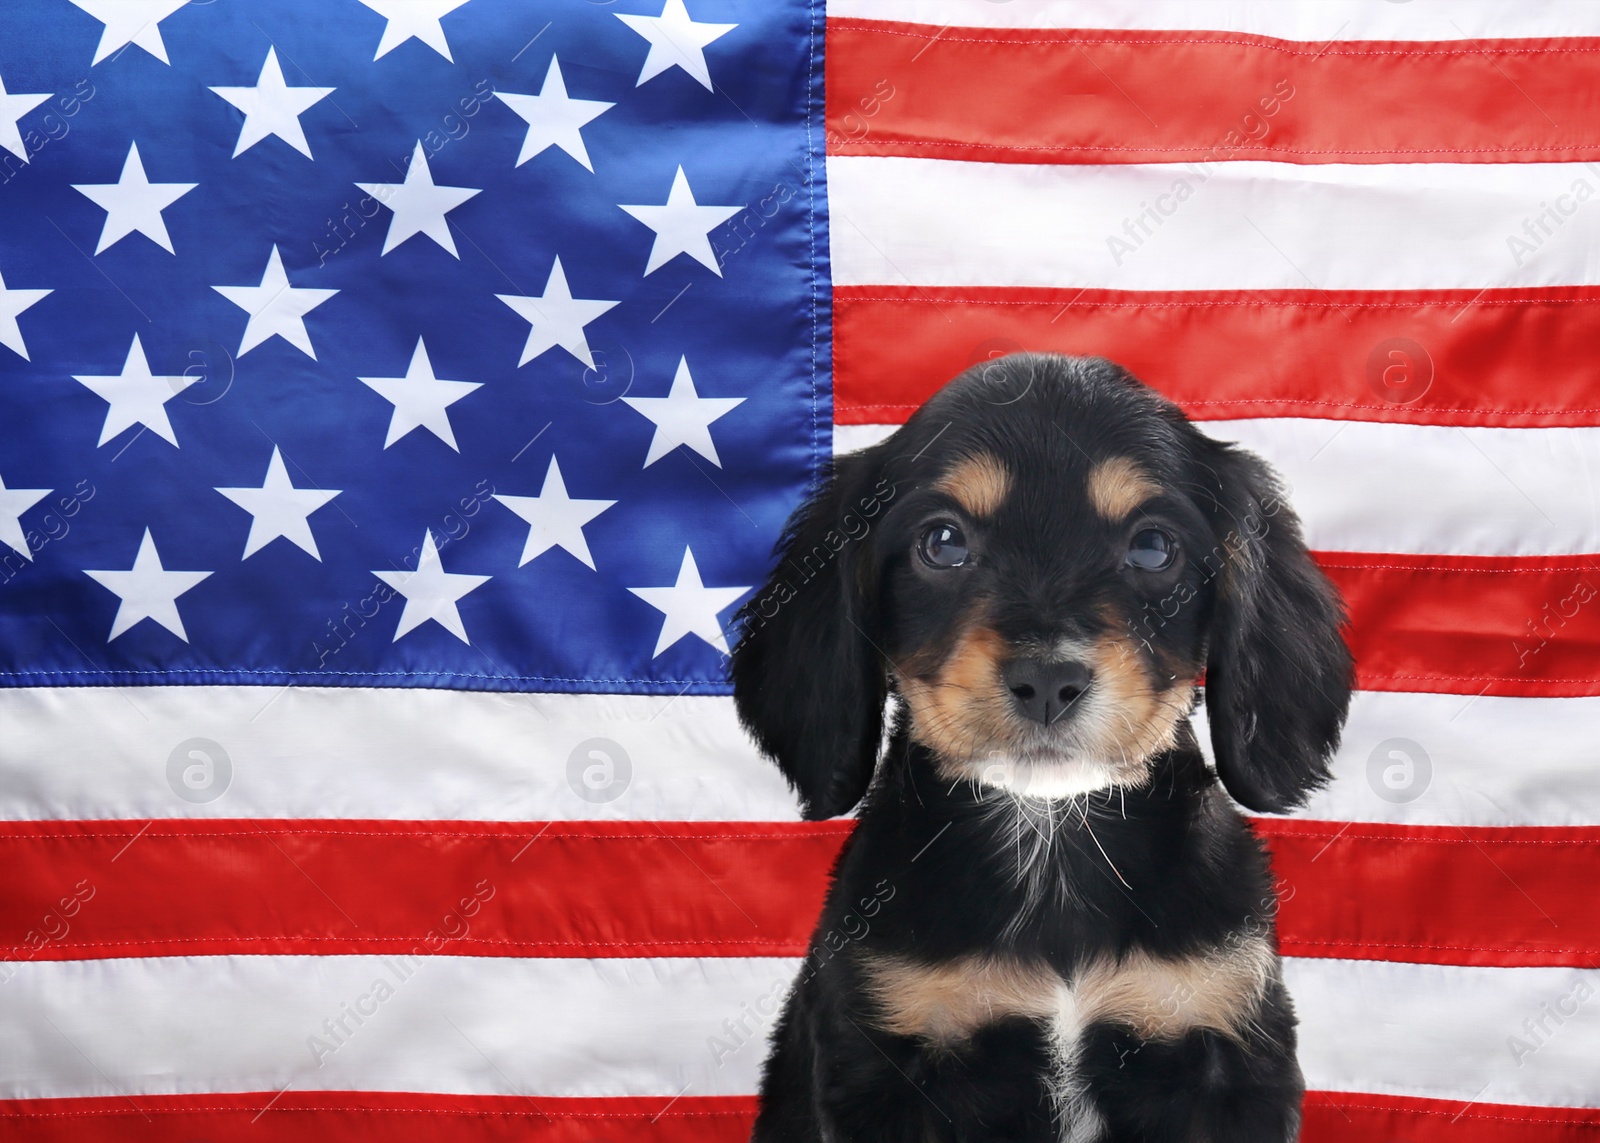 Image of Cute dog against national flag of United States of America